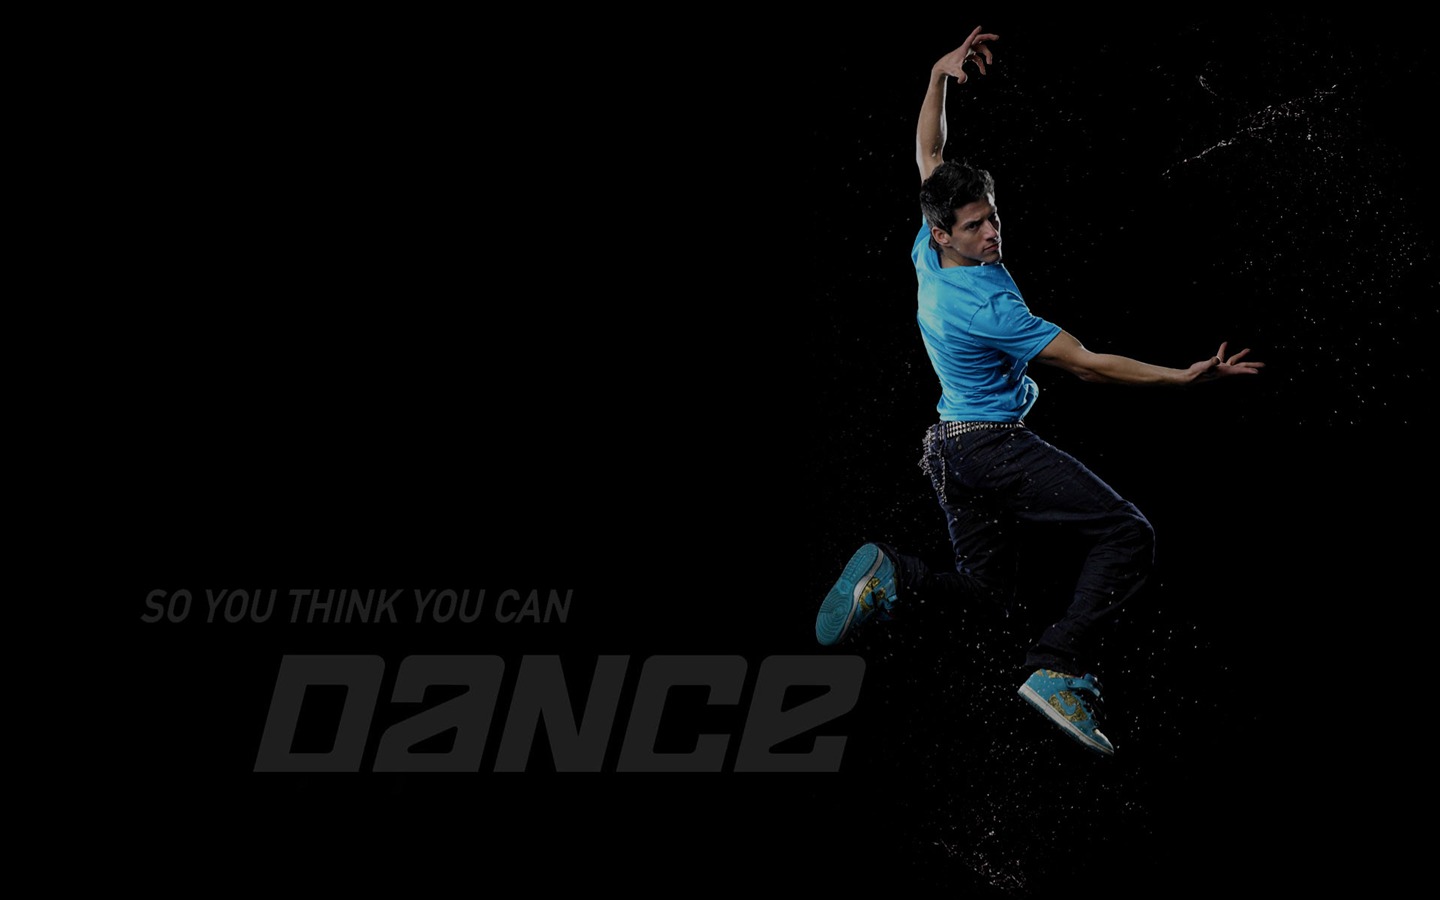 So You Think You Can Dance 舞林爭霸壁紙(二) #18 - 1440x900